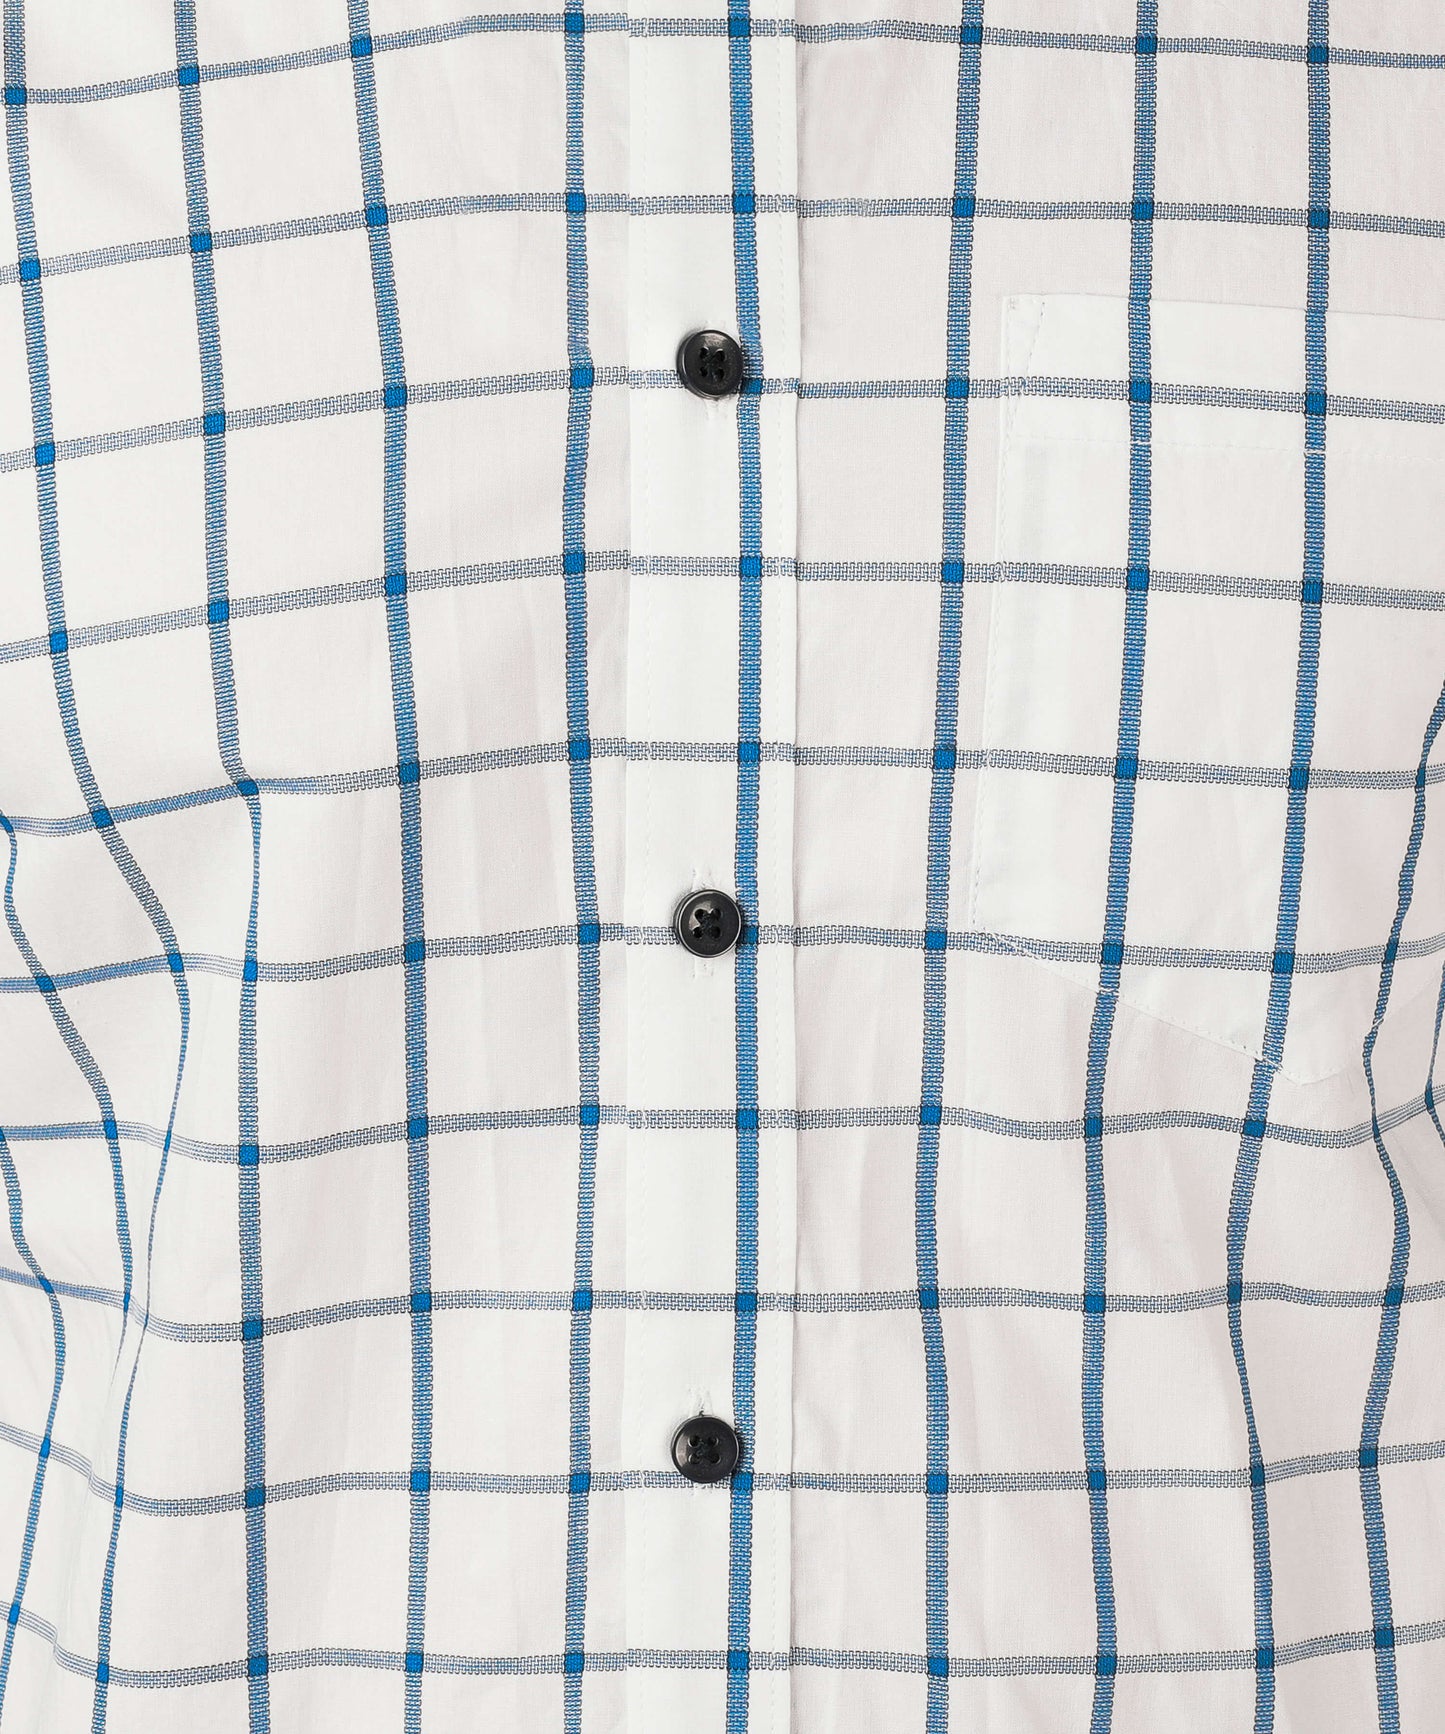 5thanfold Men's Casual Pure Cotton Full Sleeve Checkered White Regular Fit Shirt